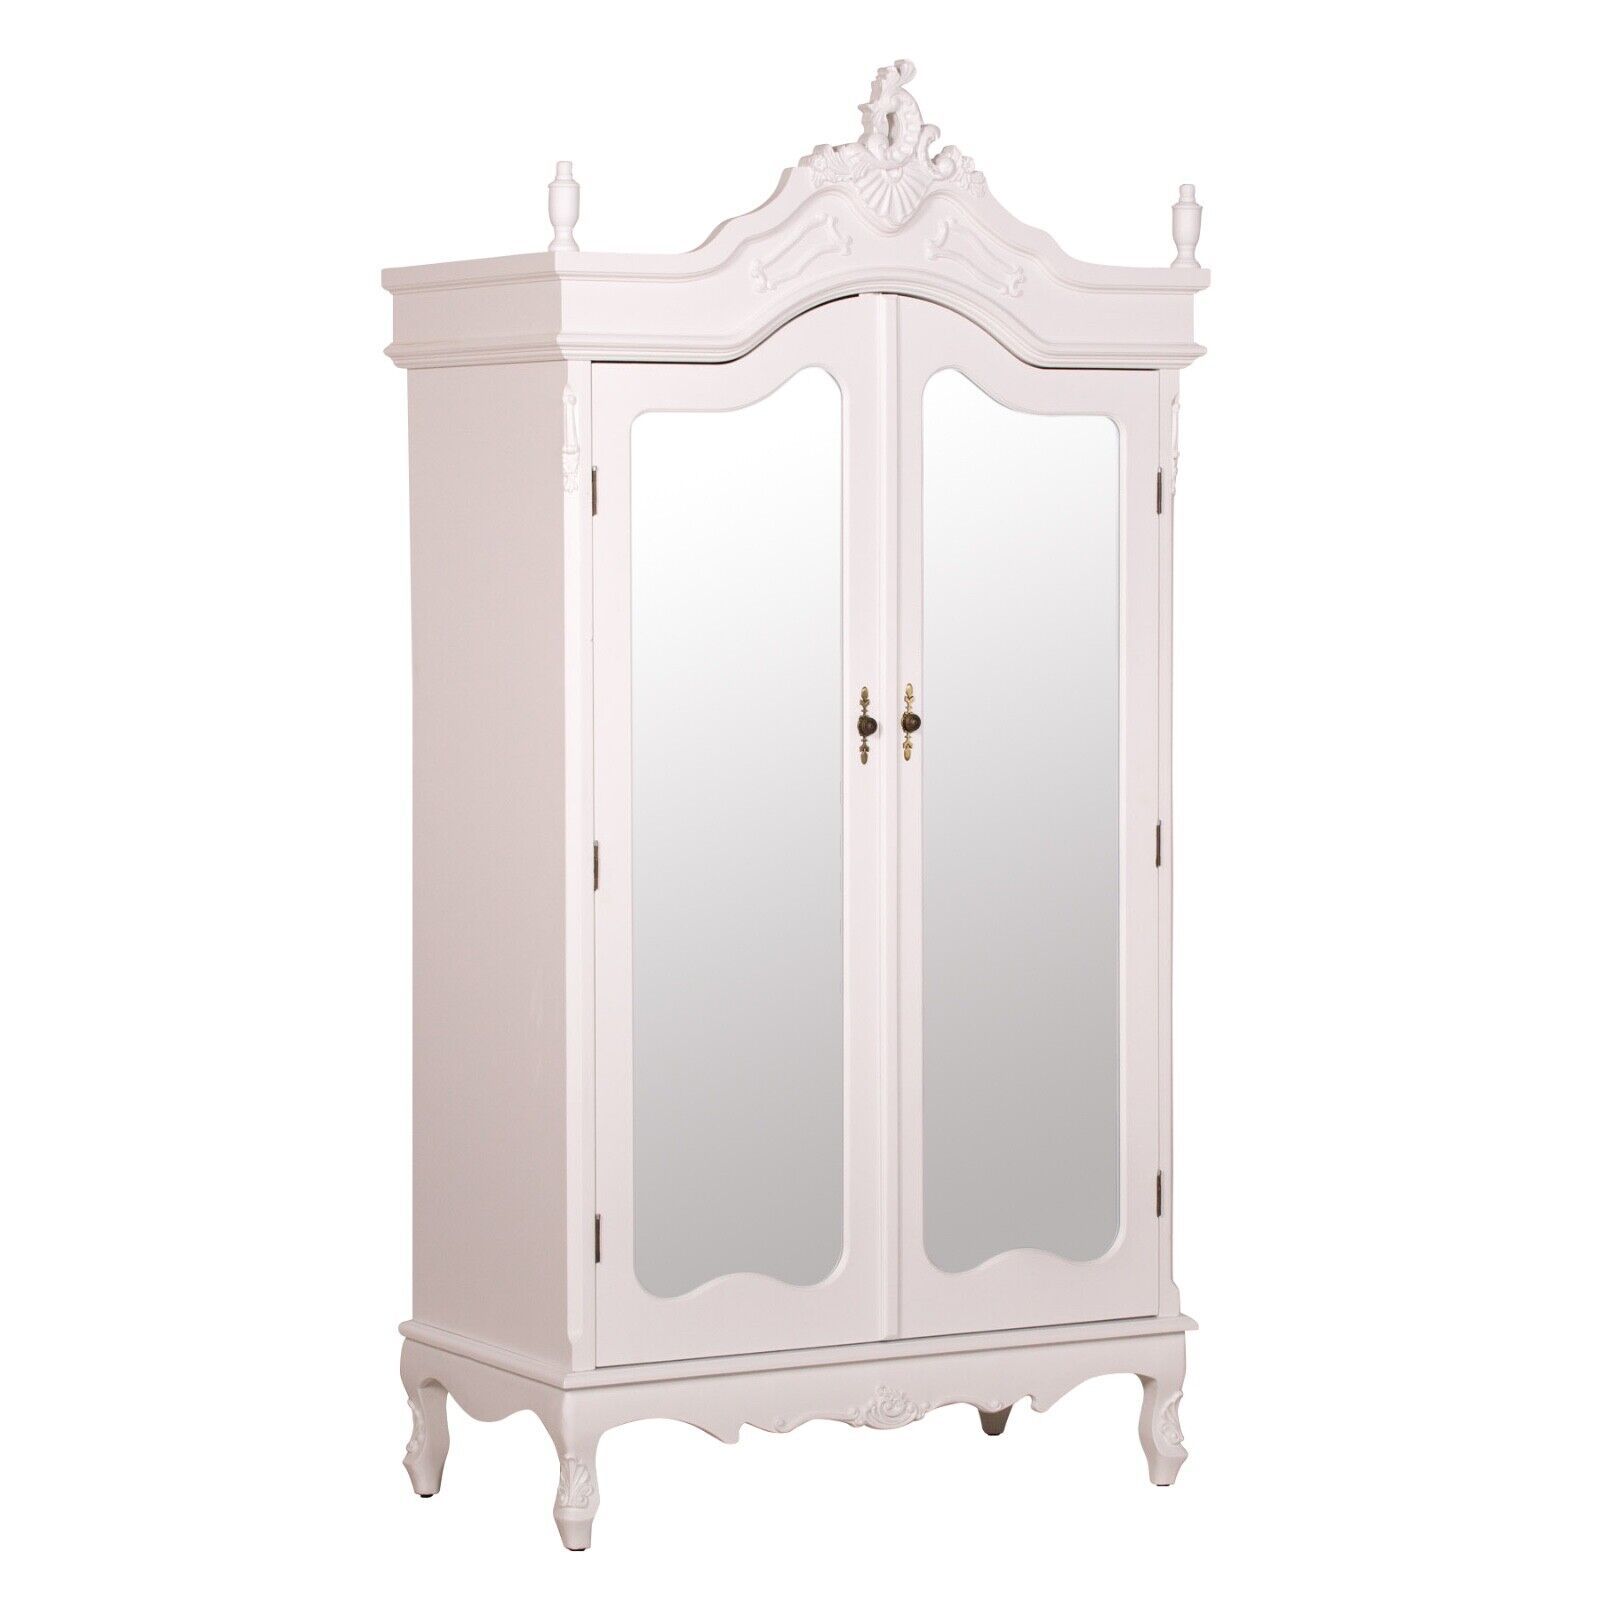 French Antique White Chateau Shabby Chic Mirrored Double Armoire Wardrobe |  Ebay Pertaining To White Shabby Chic Wardrobes (View 11 of 15)